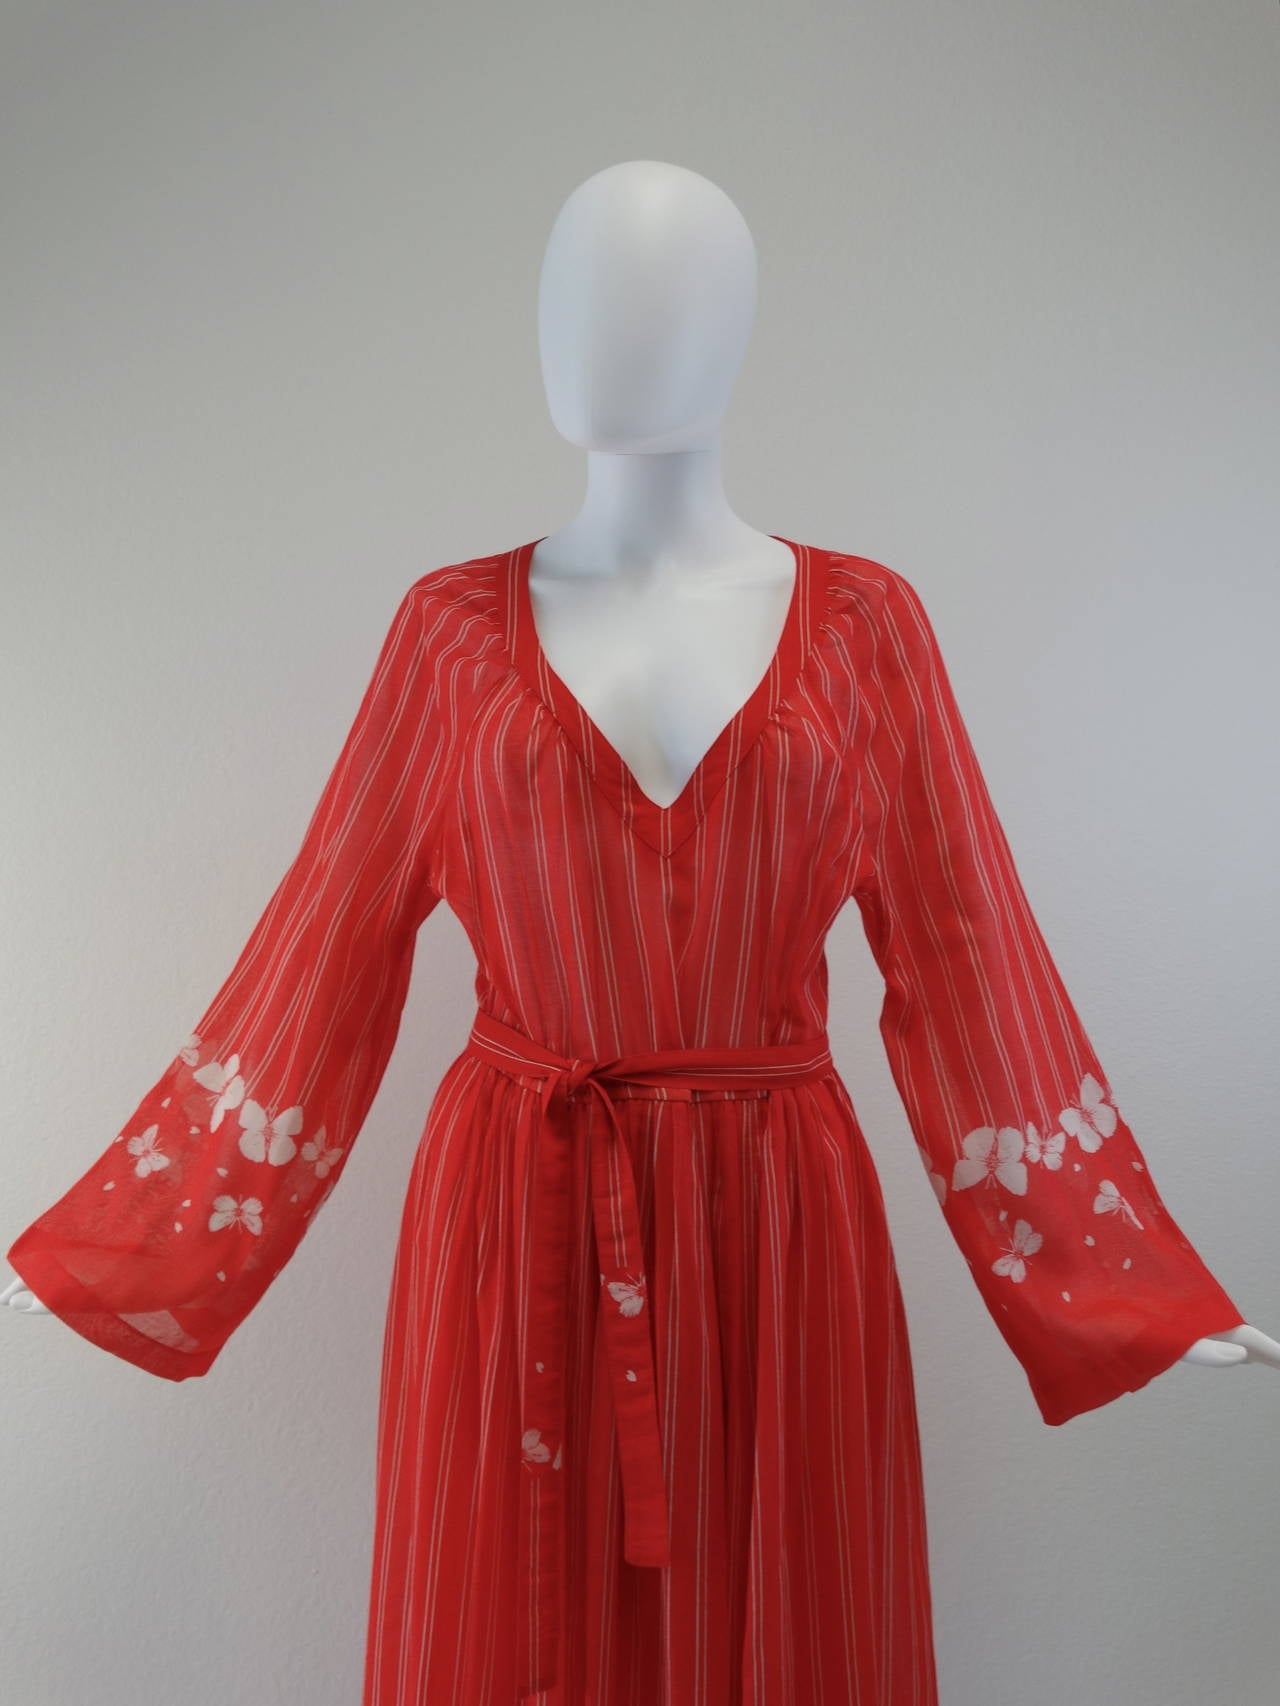 Featured is a lovely late 1970s Hanae Mori cotton maxi dress with a v-neck neckline. Its whimsical butterfly design trims the bottom of the sleeves and dress hem with white stripes covering the entire surface. It is made of a light cotton and has a